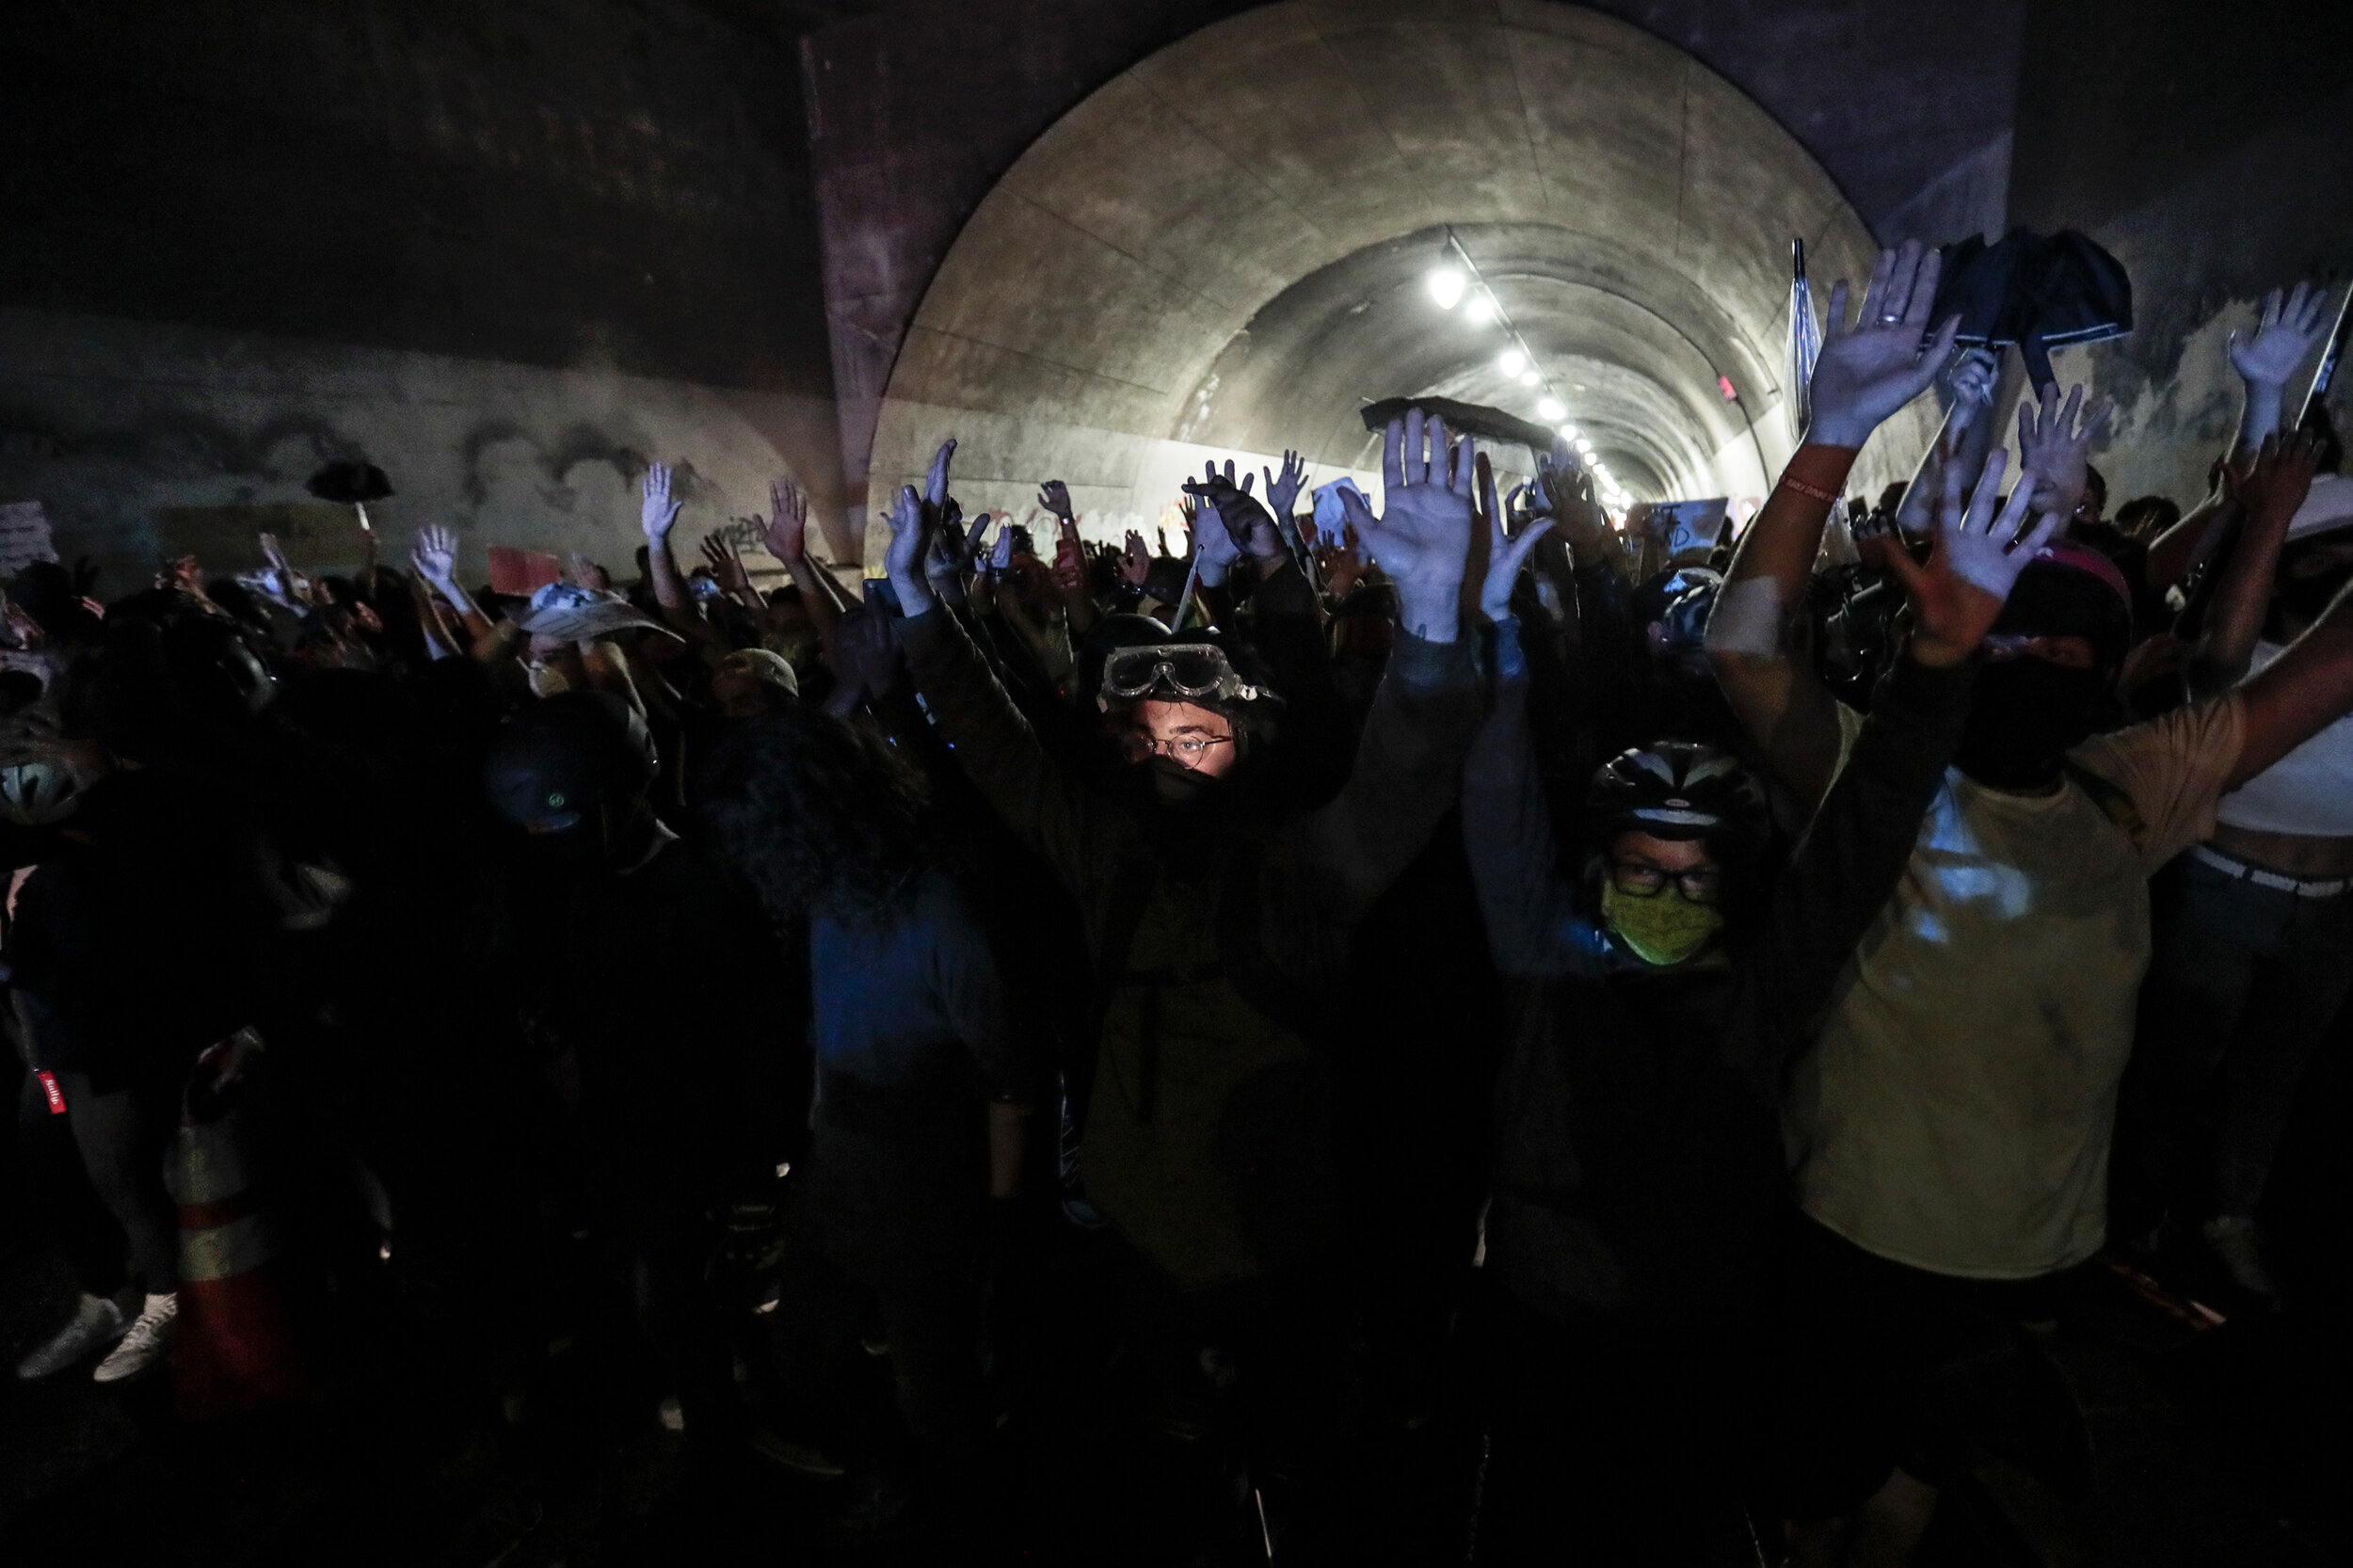  Protesters raise their hands as LAPD officers converge on them from both sides in the Third St. underpass, August 26.According to Wikipedia - Polls in summer 2020 estimated that between 15 million and 26 million people had participated at some point